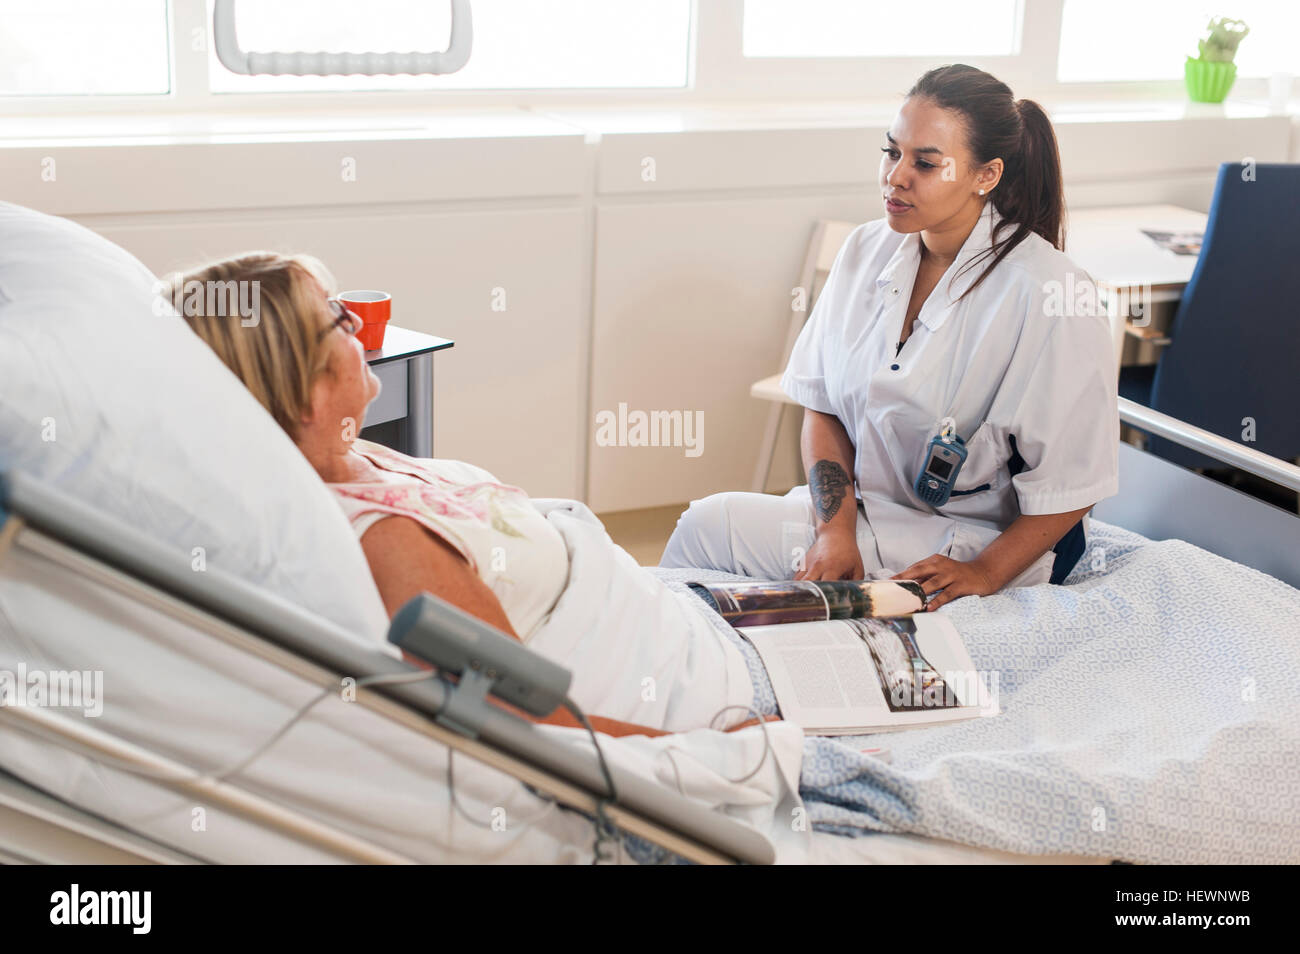 Nurse tending to patient in hospital bed Stock Photo